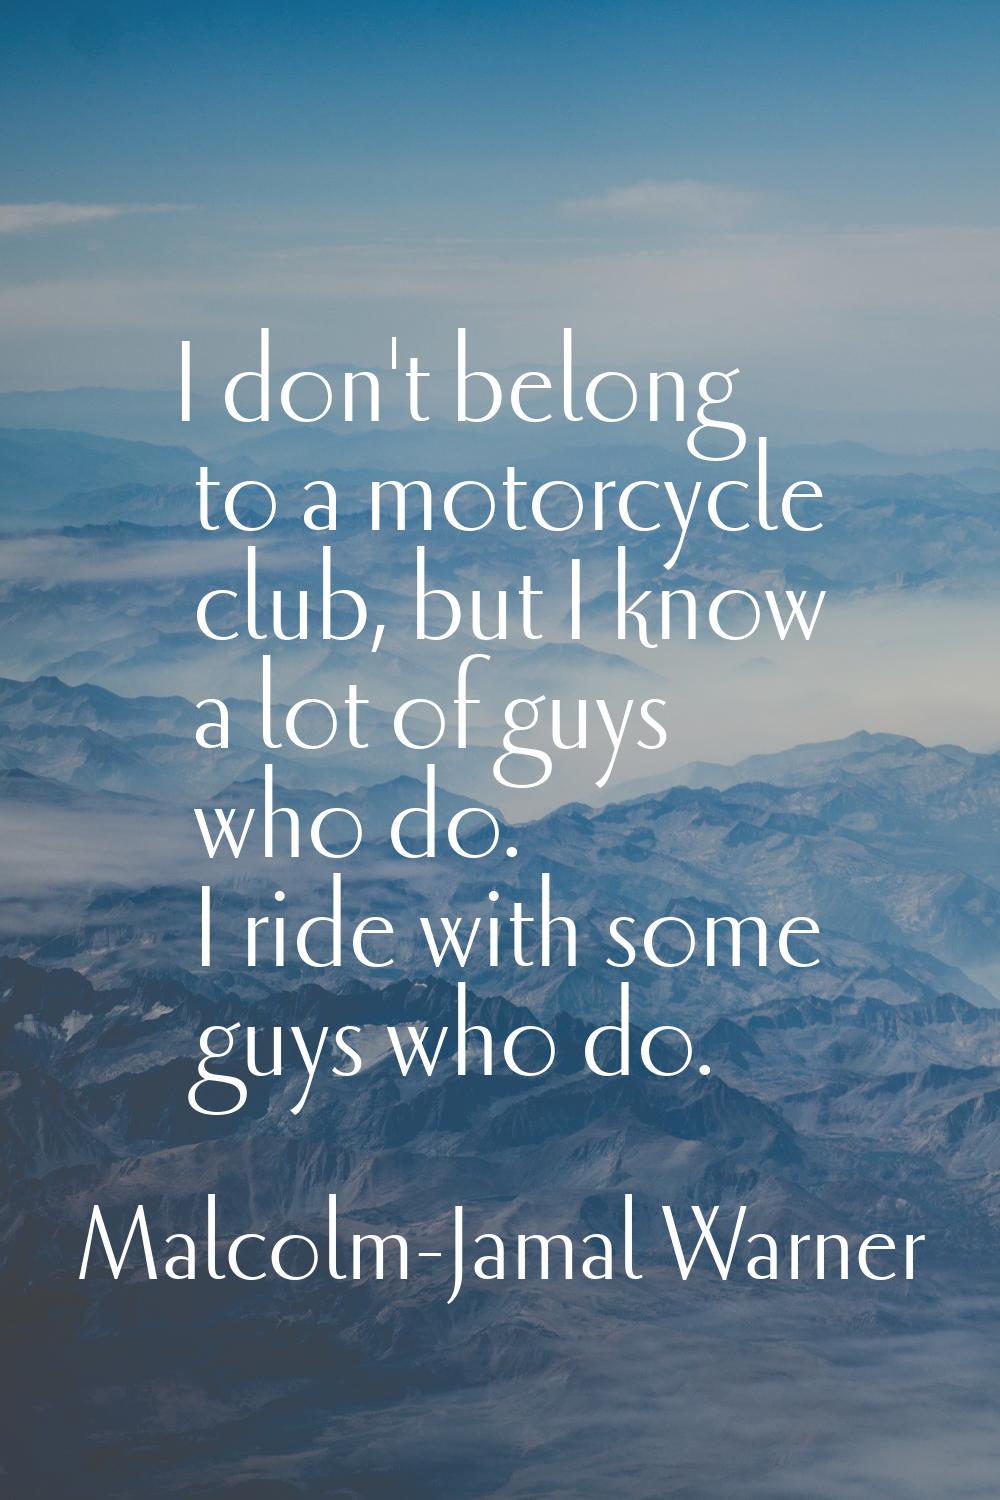 I don't belong to a motorcycle club, but I know a lot of guys who do. I ride with some guys who do.